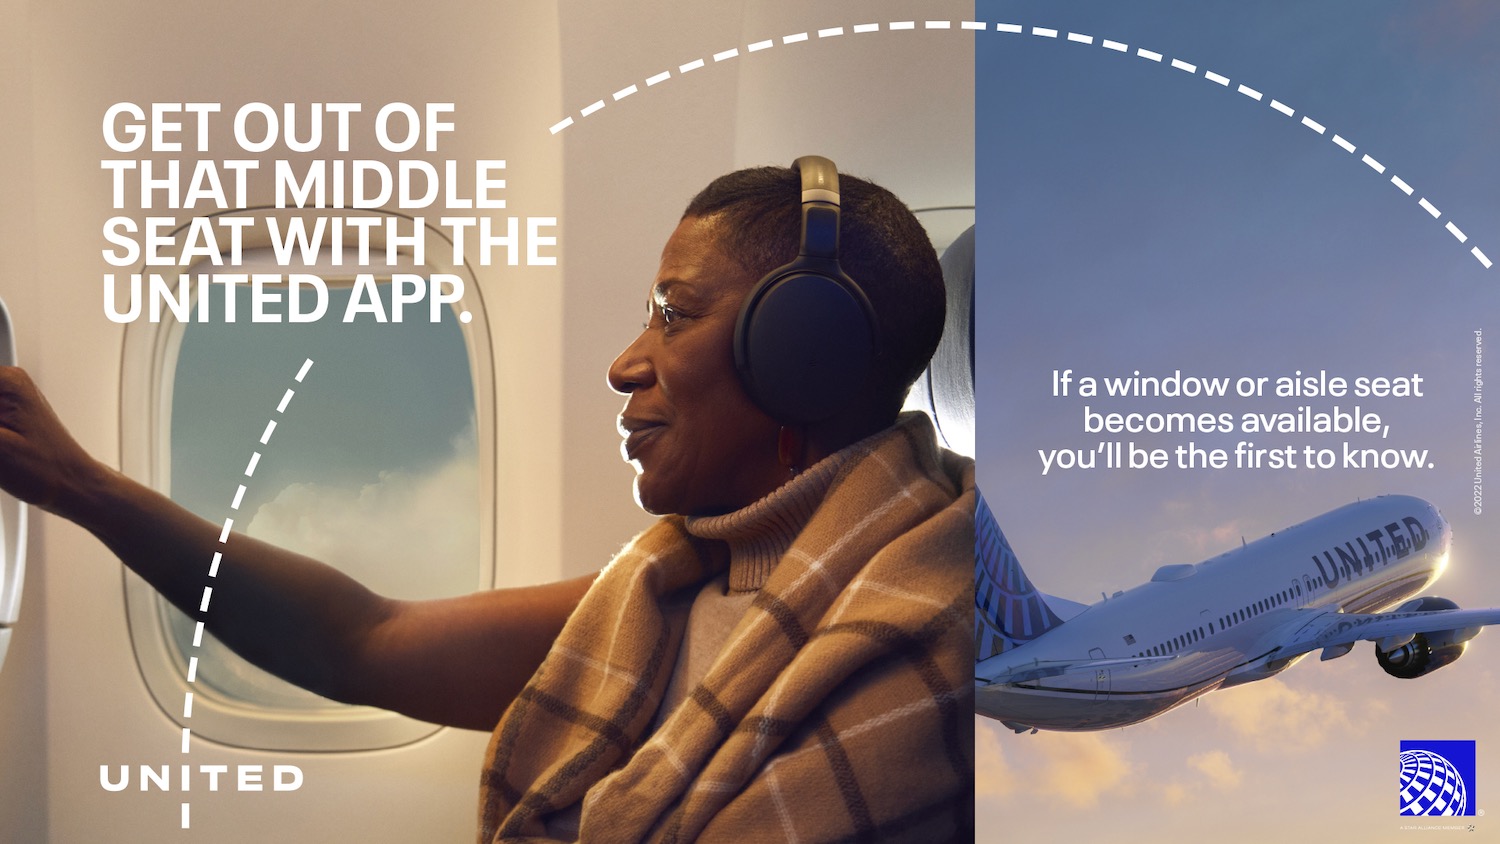 a woman wearing headphones and a blanket on a plane